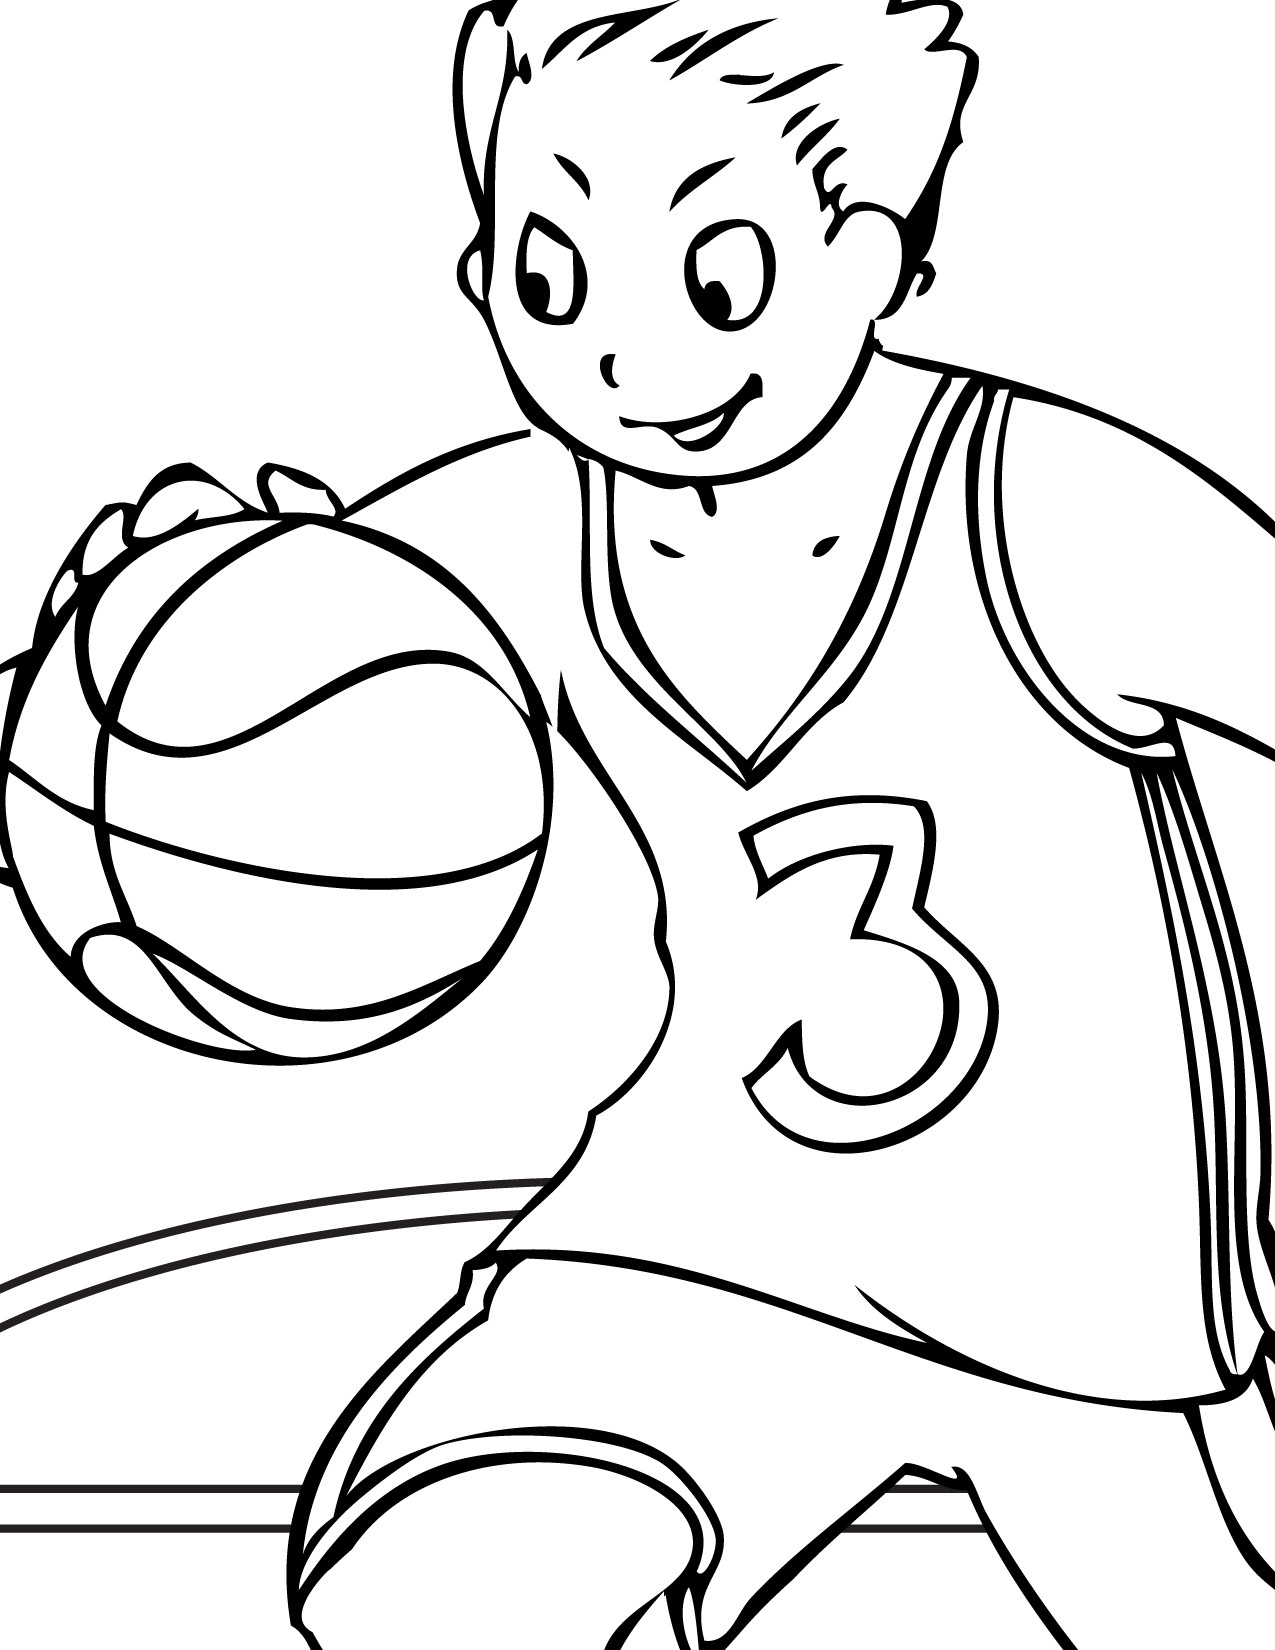 Kids Online Coloring Page
 Free Printable Volleyball Coloring Pages For Kids